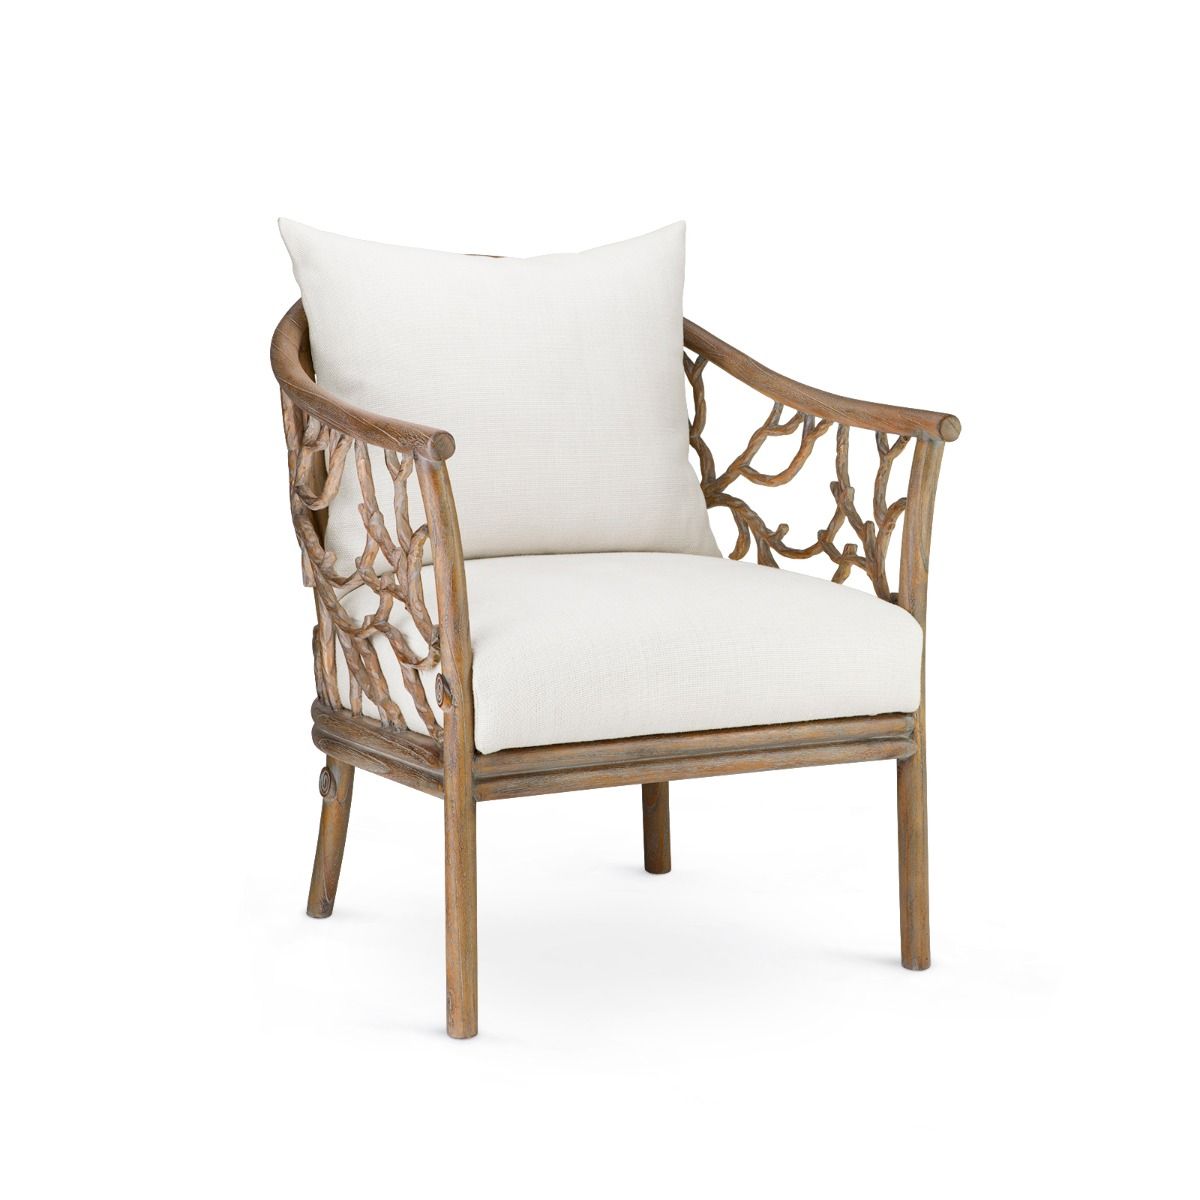 Load image into Gallery viewer, Bosco Armchair, Driftwood Dining Chair Bungalow 5     Four Hands, Burke Decor, Mid Century Modern Furniture, Old Bones Furniture Company, Old Bones Co, Modern Mid Century, Designer Furniture, https://www.oldbonesco.com/
